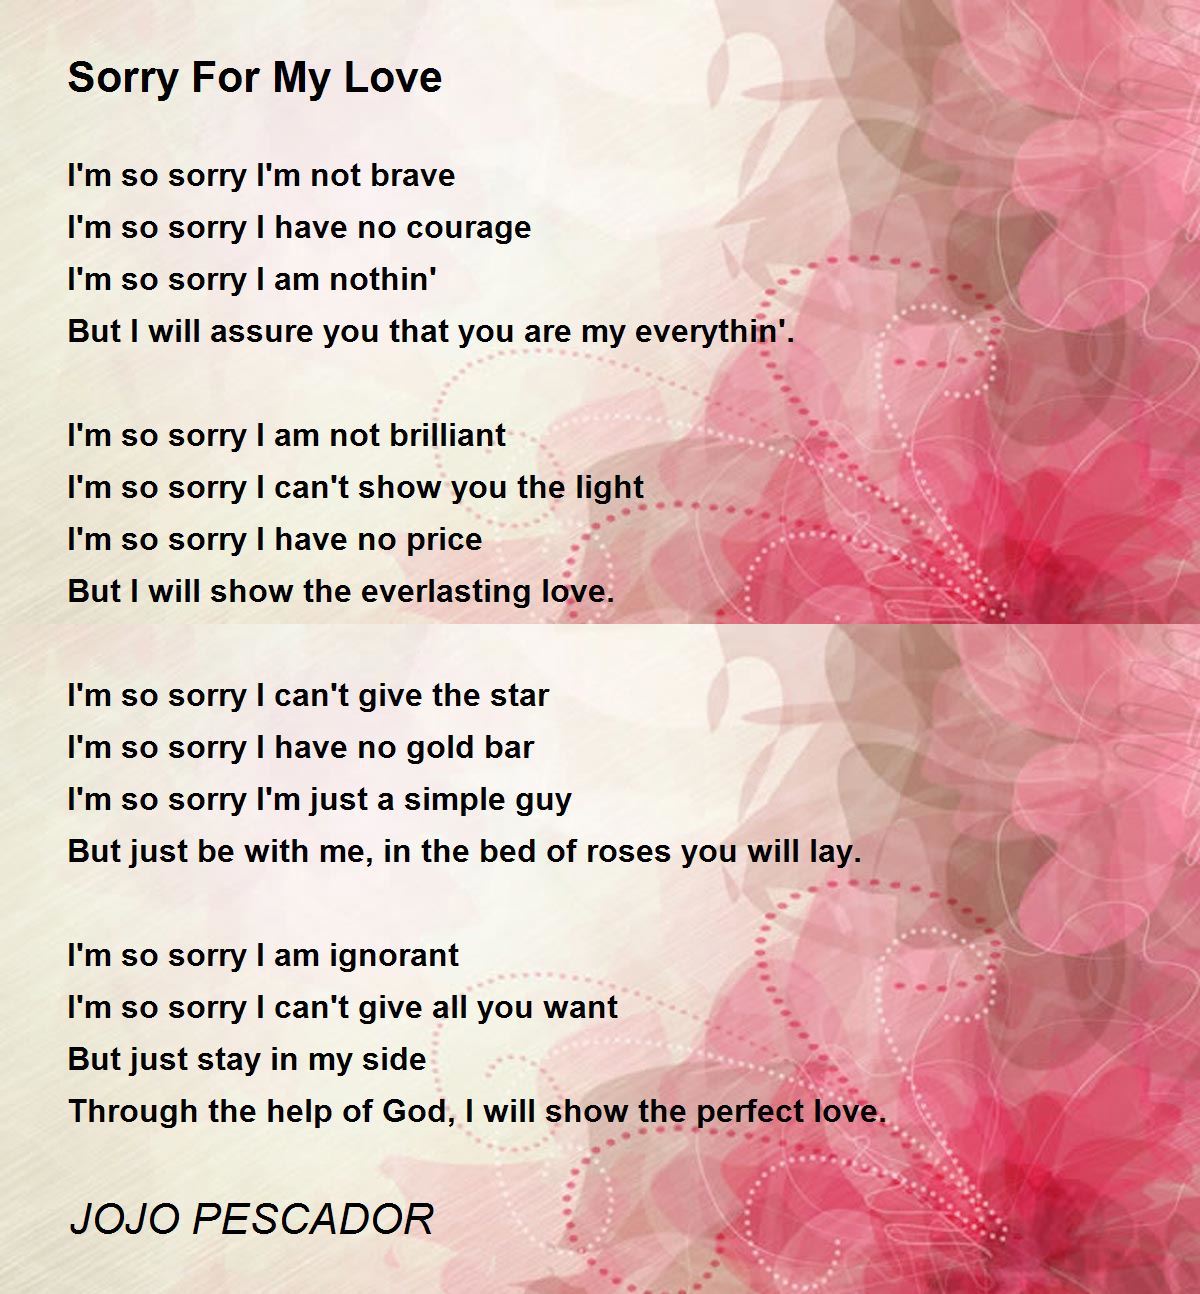 Sorry For My Love - Sorry For My Love Poem by JOJO PESCADOR